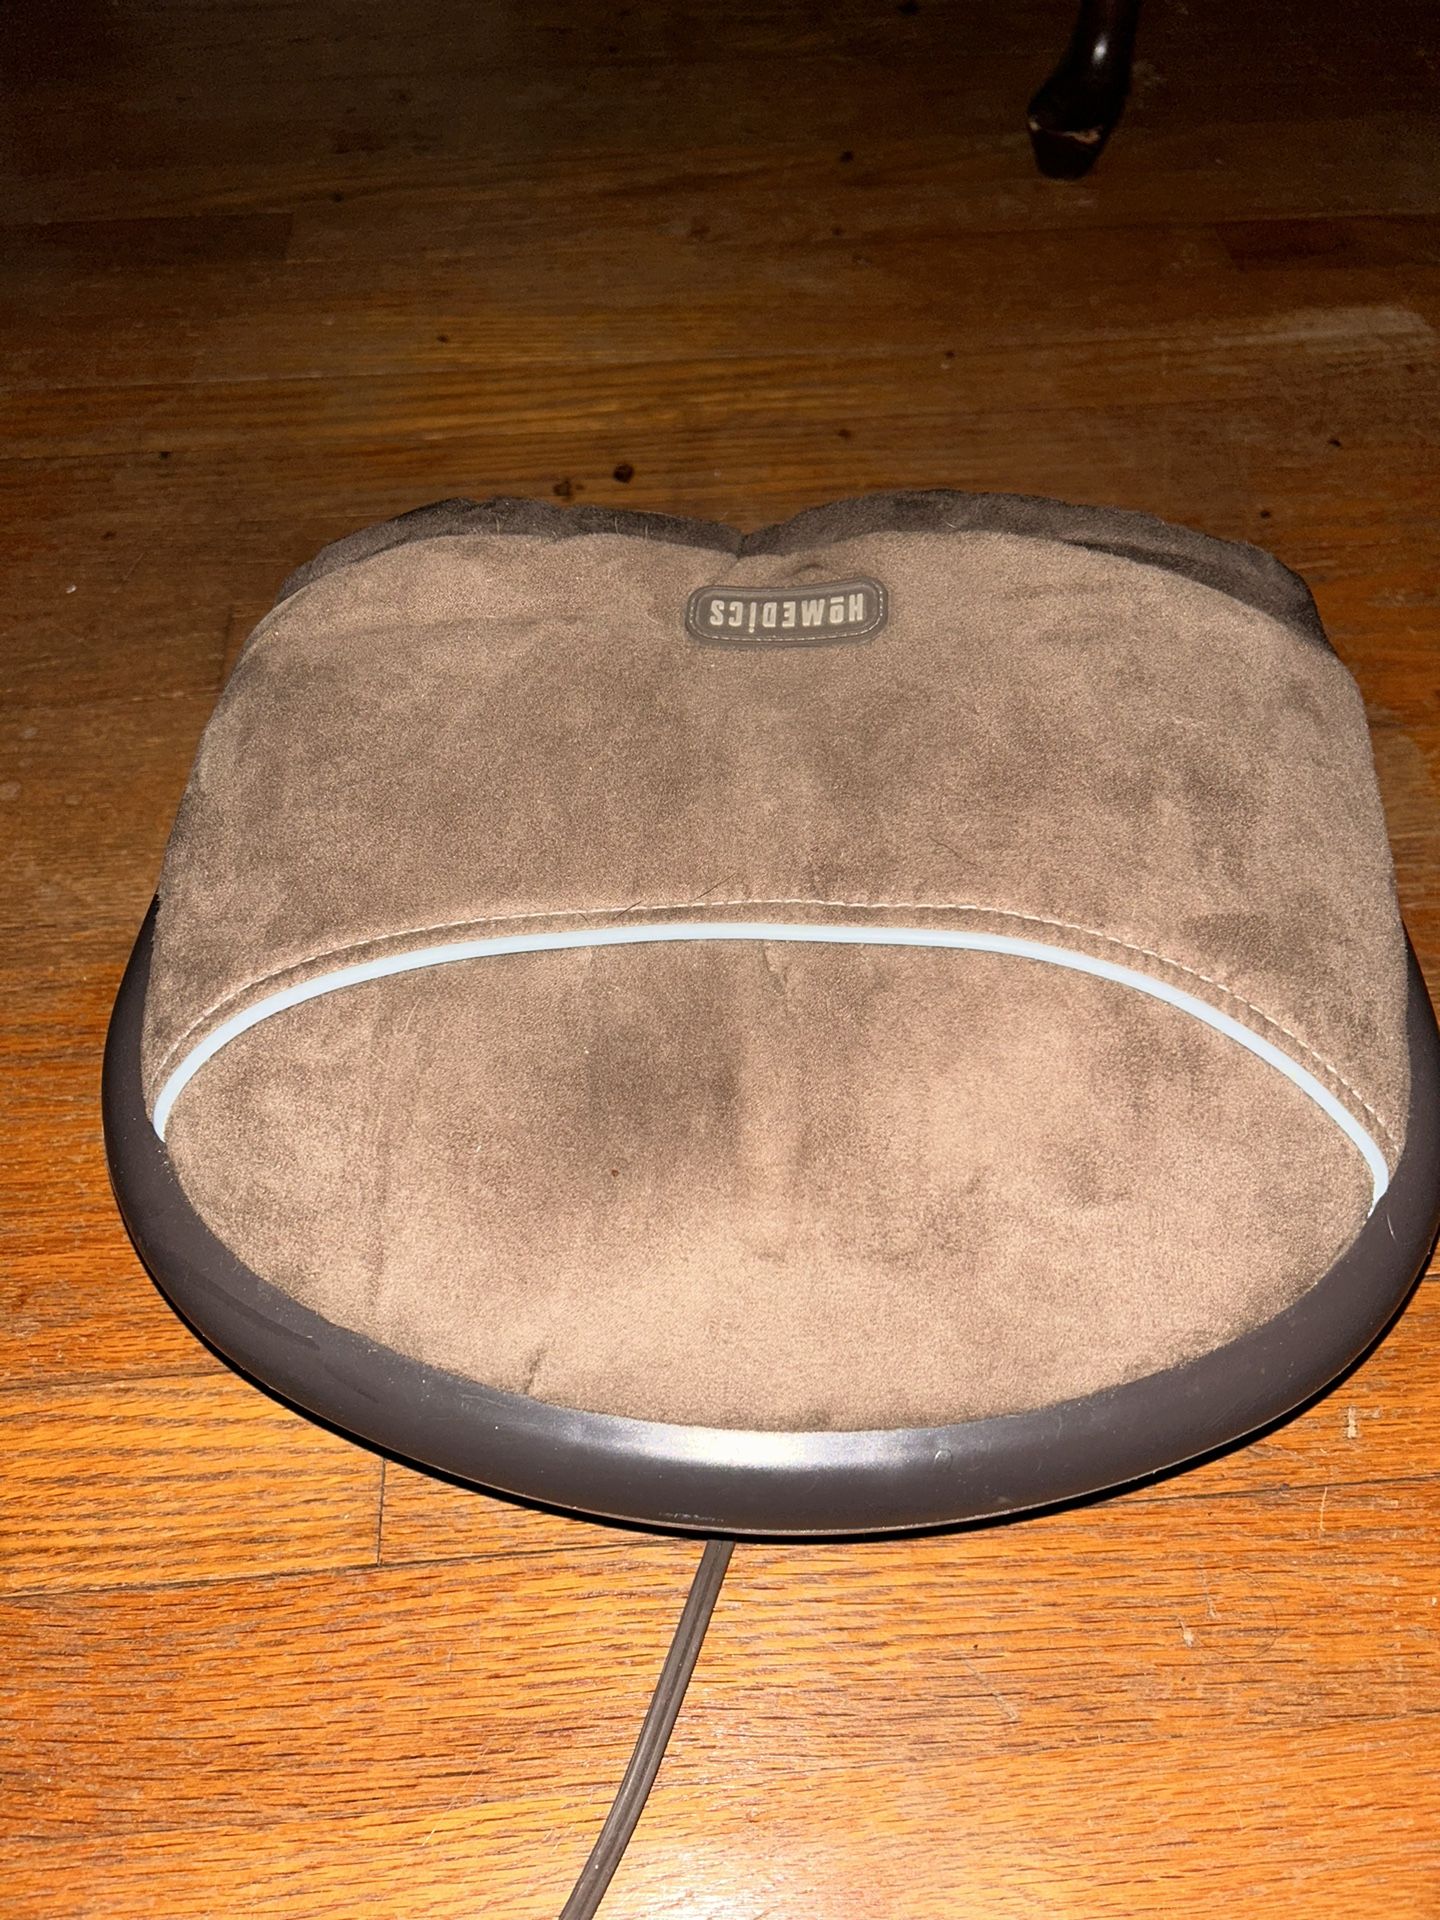 HOMEDICS Heated Foot Massager W/compression, Great Condition